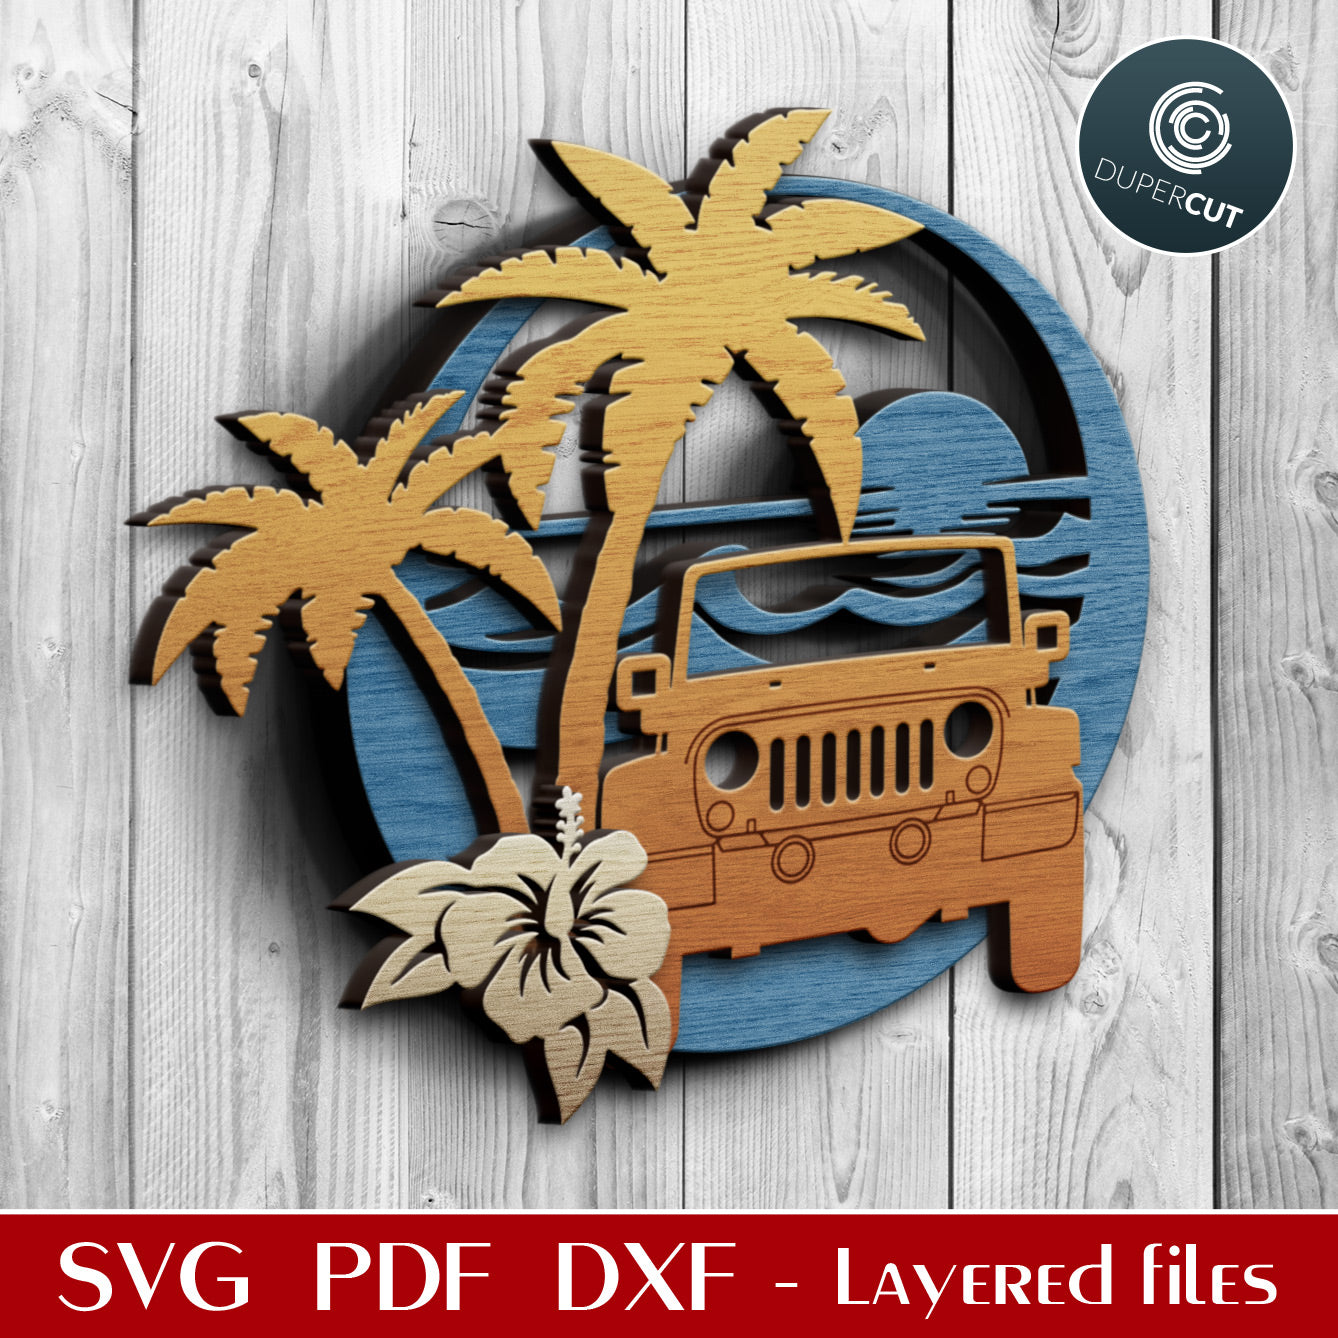 Jeep on the beach off-road adventure - layered cutting files - SVG PDF DXF vector template for Glowforge, laser cutters, Cricut, Silhouette Cameo